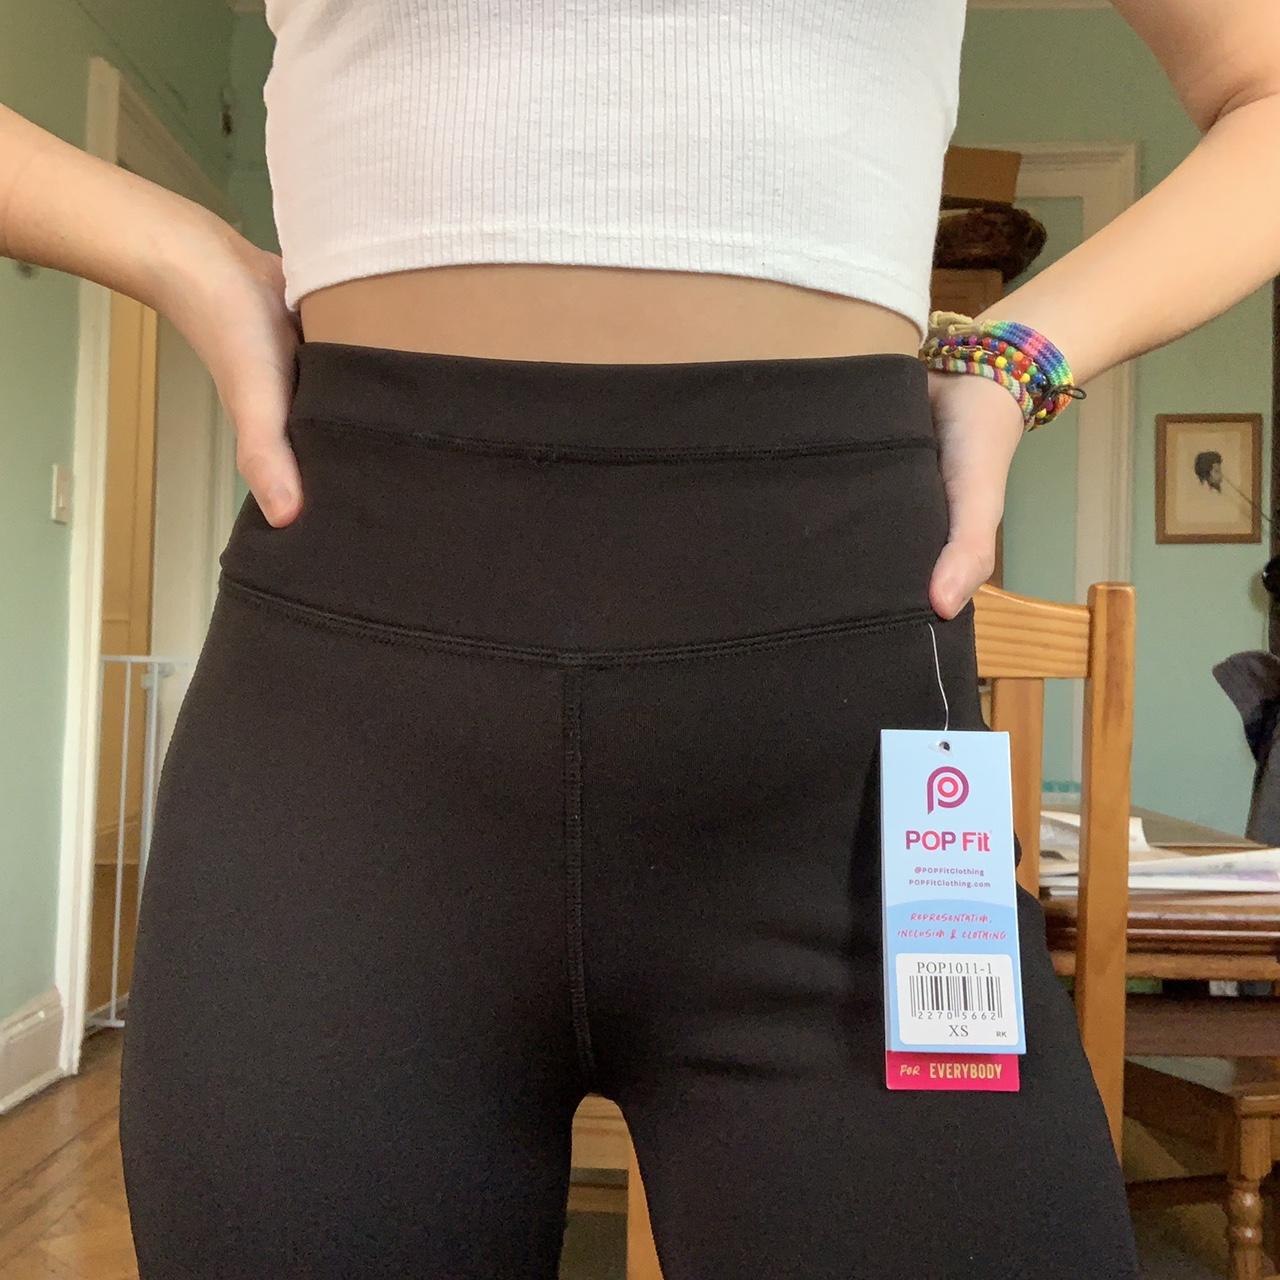 brand new with tag, cropped black pop fit leggings!